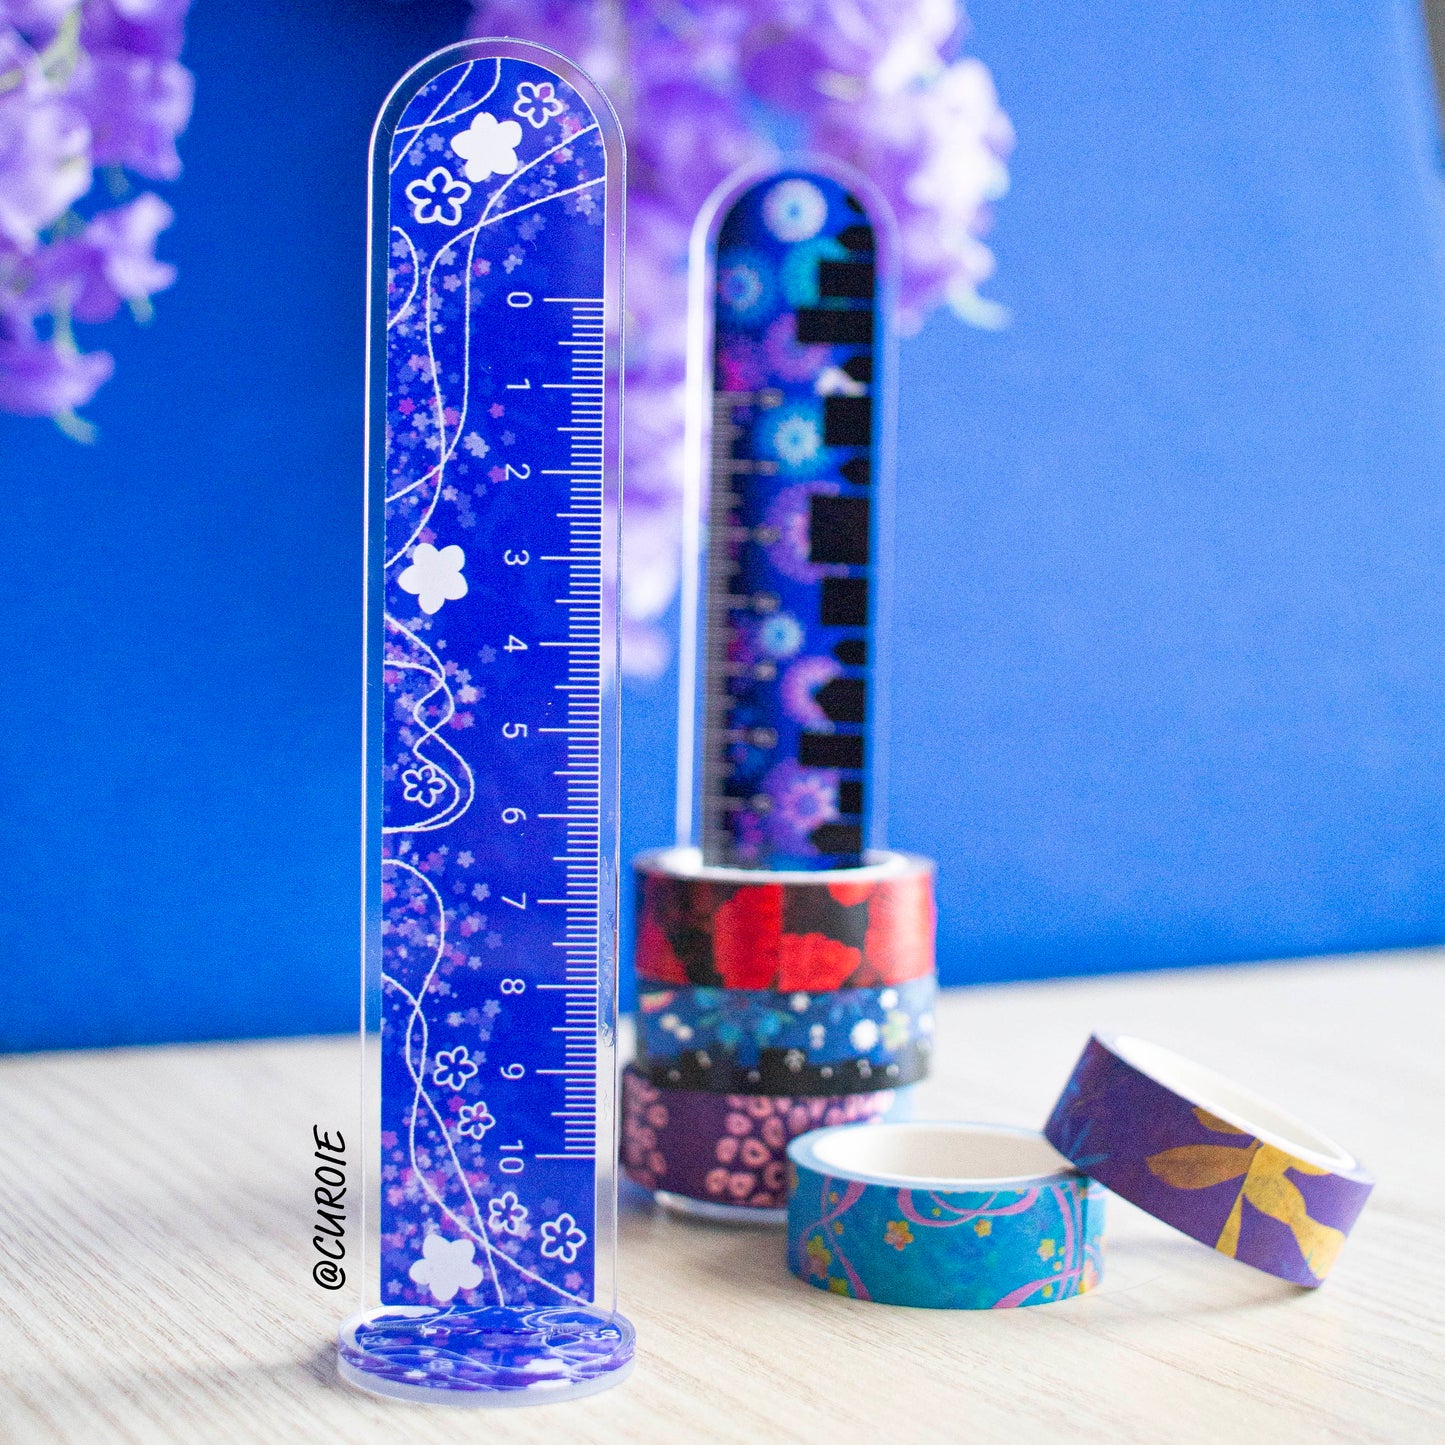 Washi Tape stands & Ruler